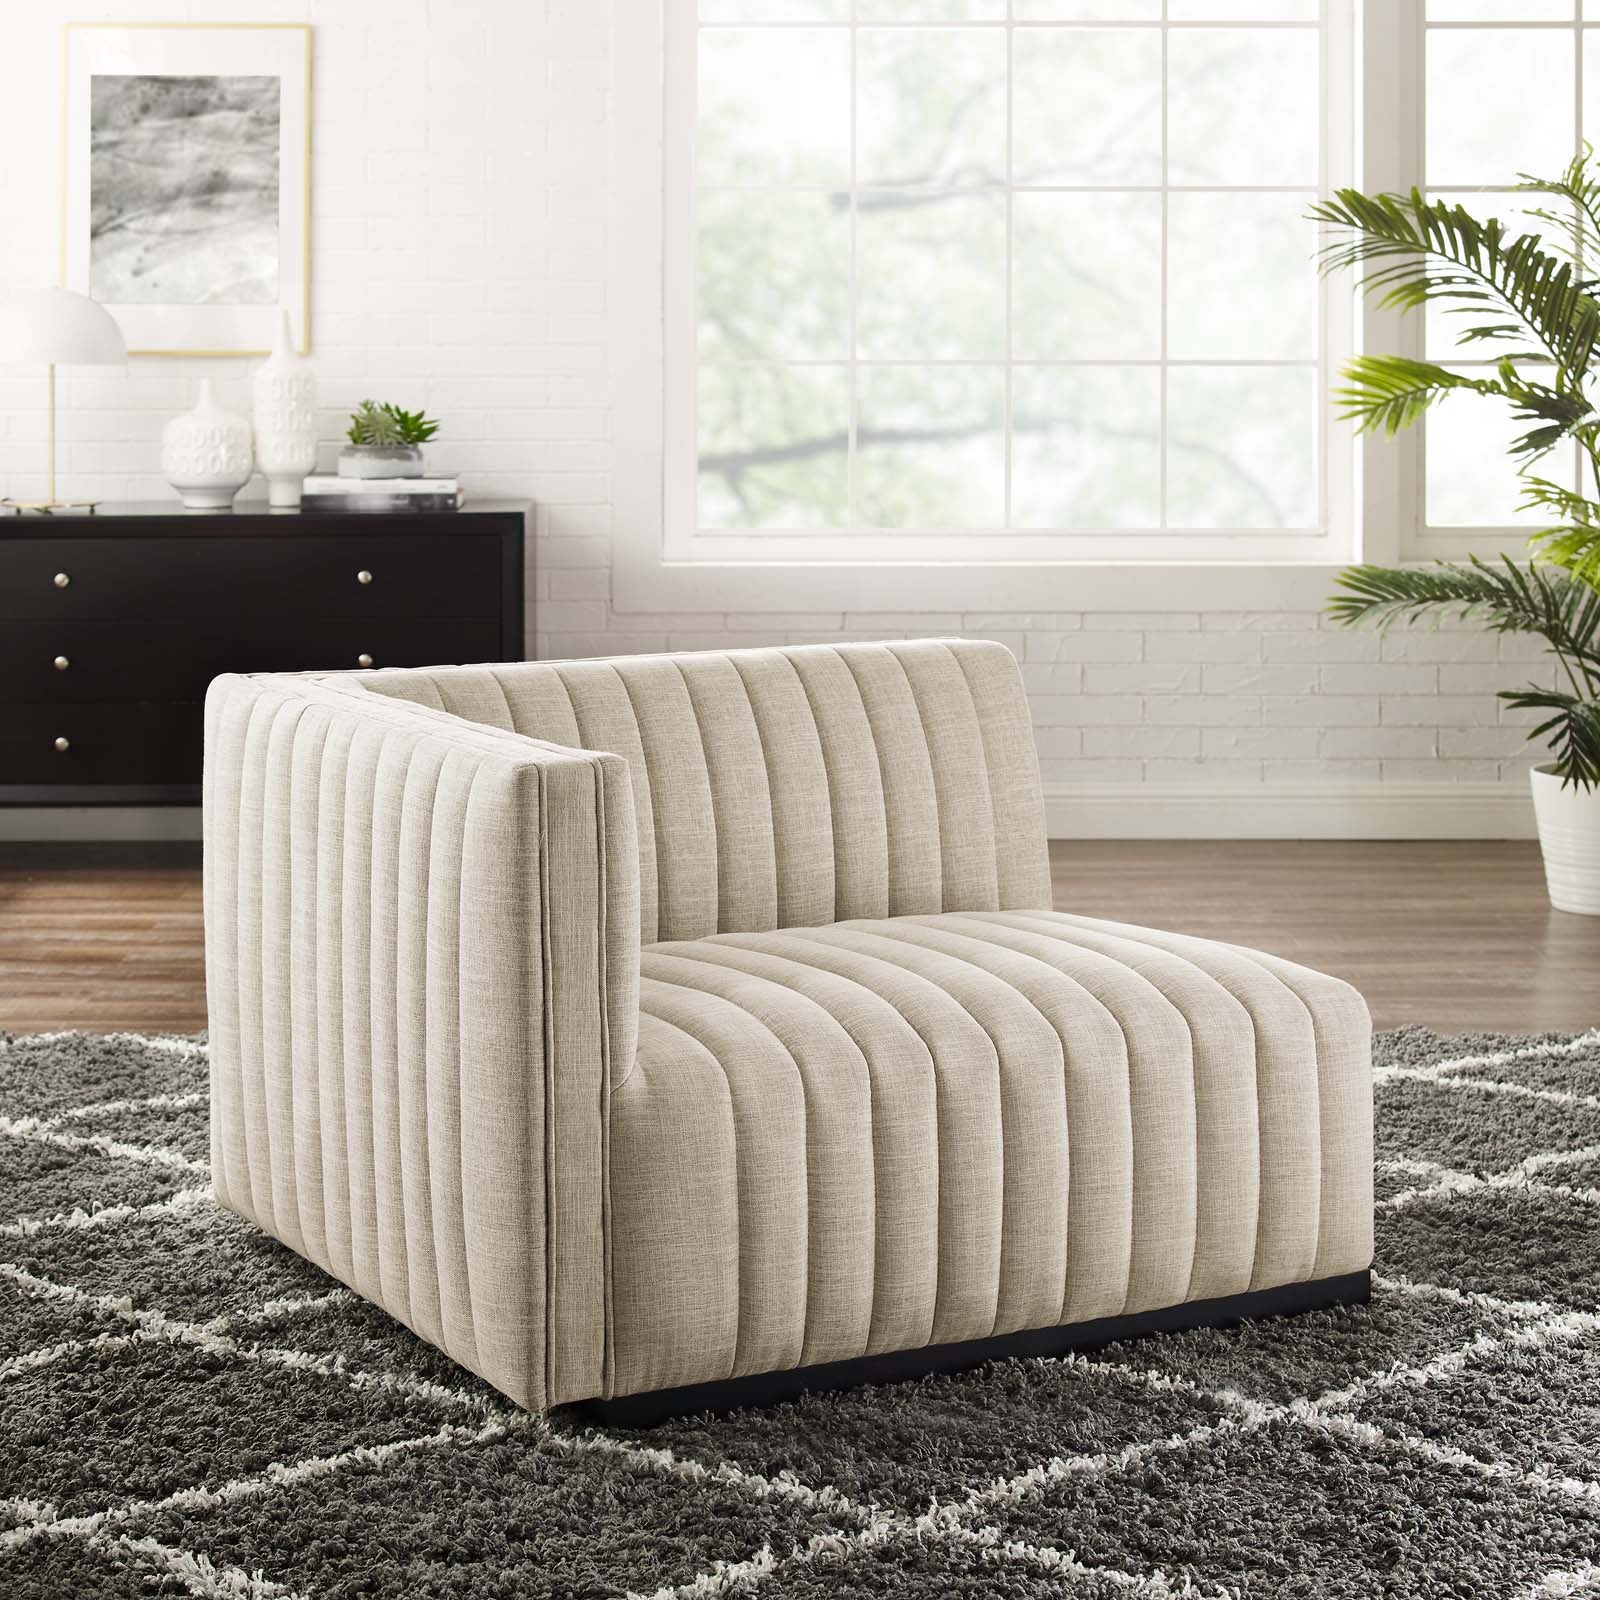 Conjure Channel Tufted Upholstered Fabric Left-Arm Chair - East Shore Modern Home Furnishings